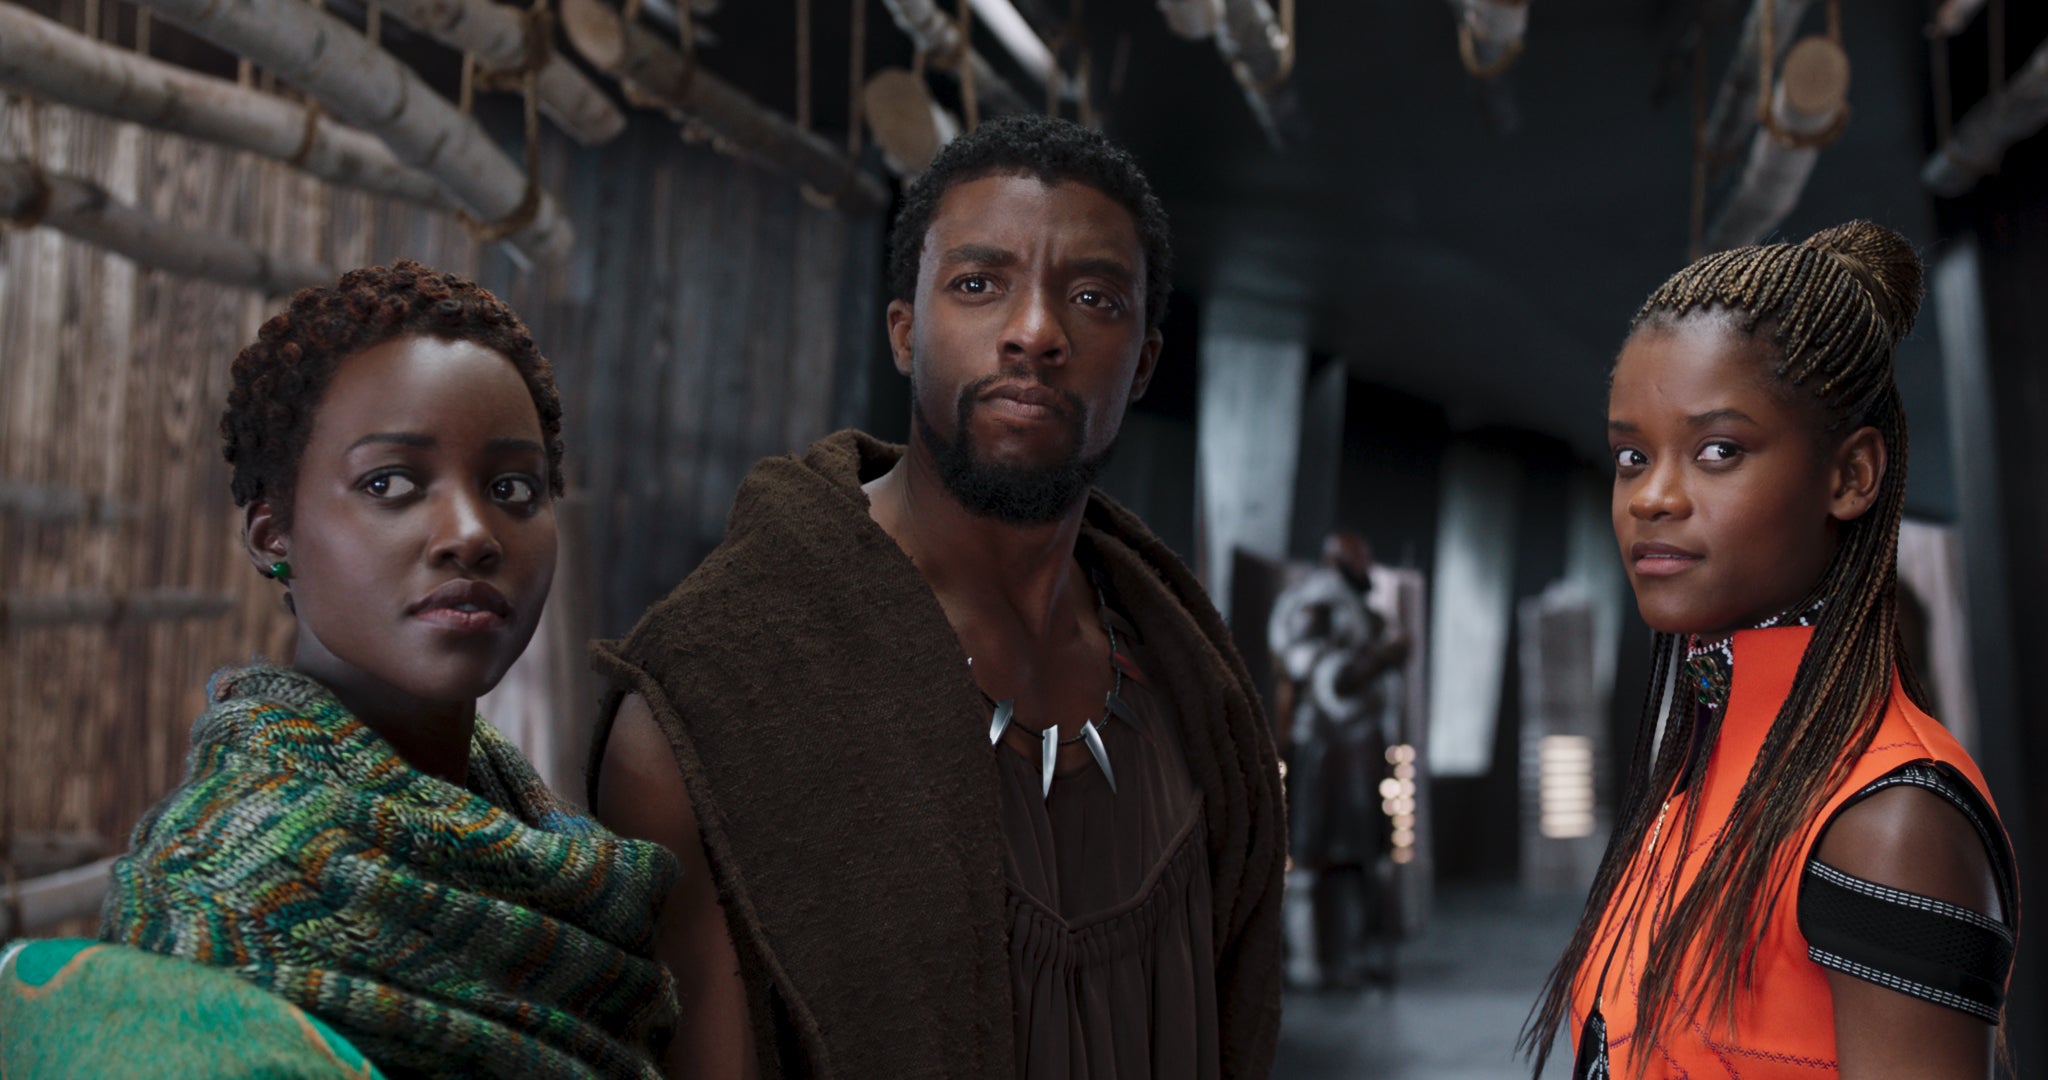 'Black Panther' Inspires Worldwide Fundraisers For Kids: Here's How You Can Support
 
